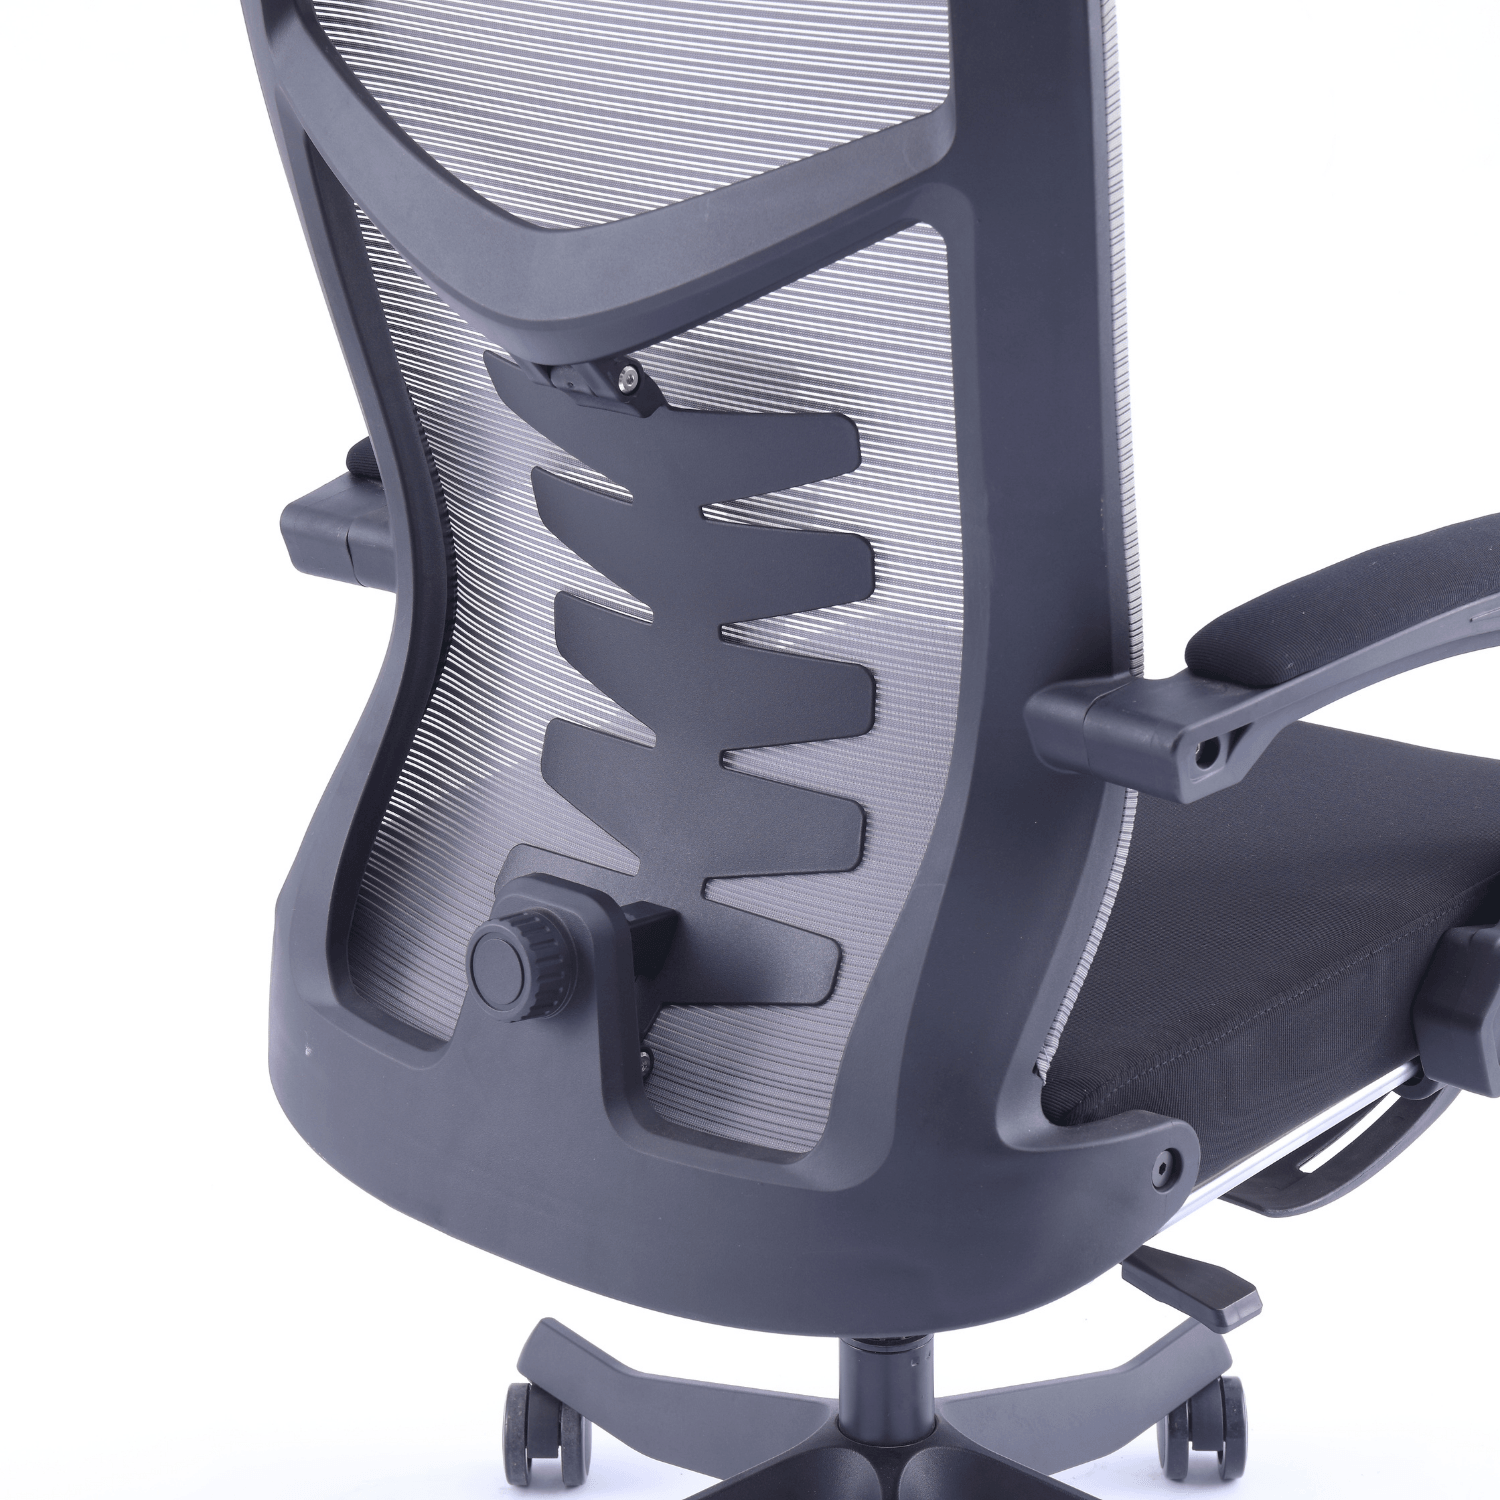 DrLuxur POSE ™ Office/Gaming Chair- Perfect for Posture, Work and Gaming - DrLuxur